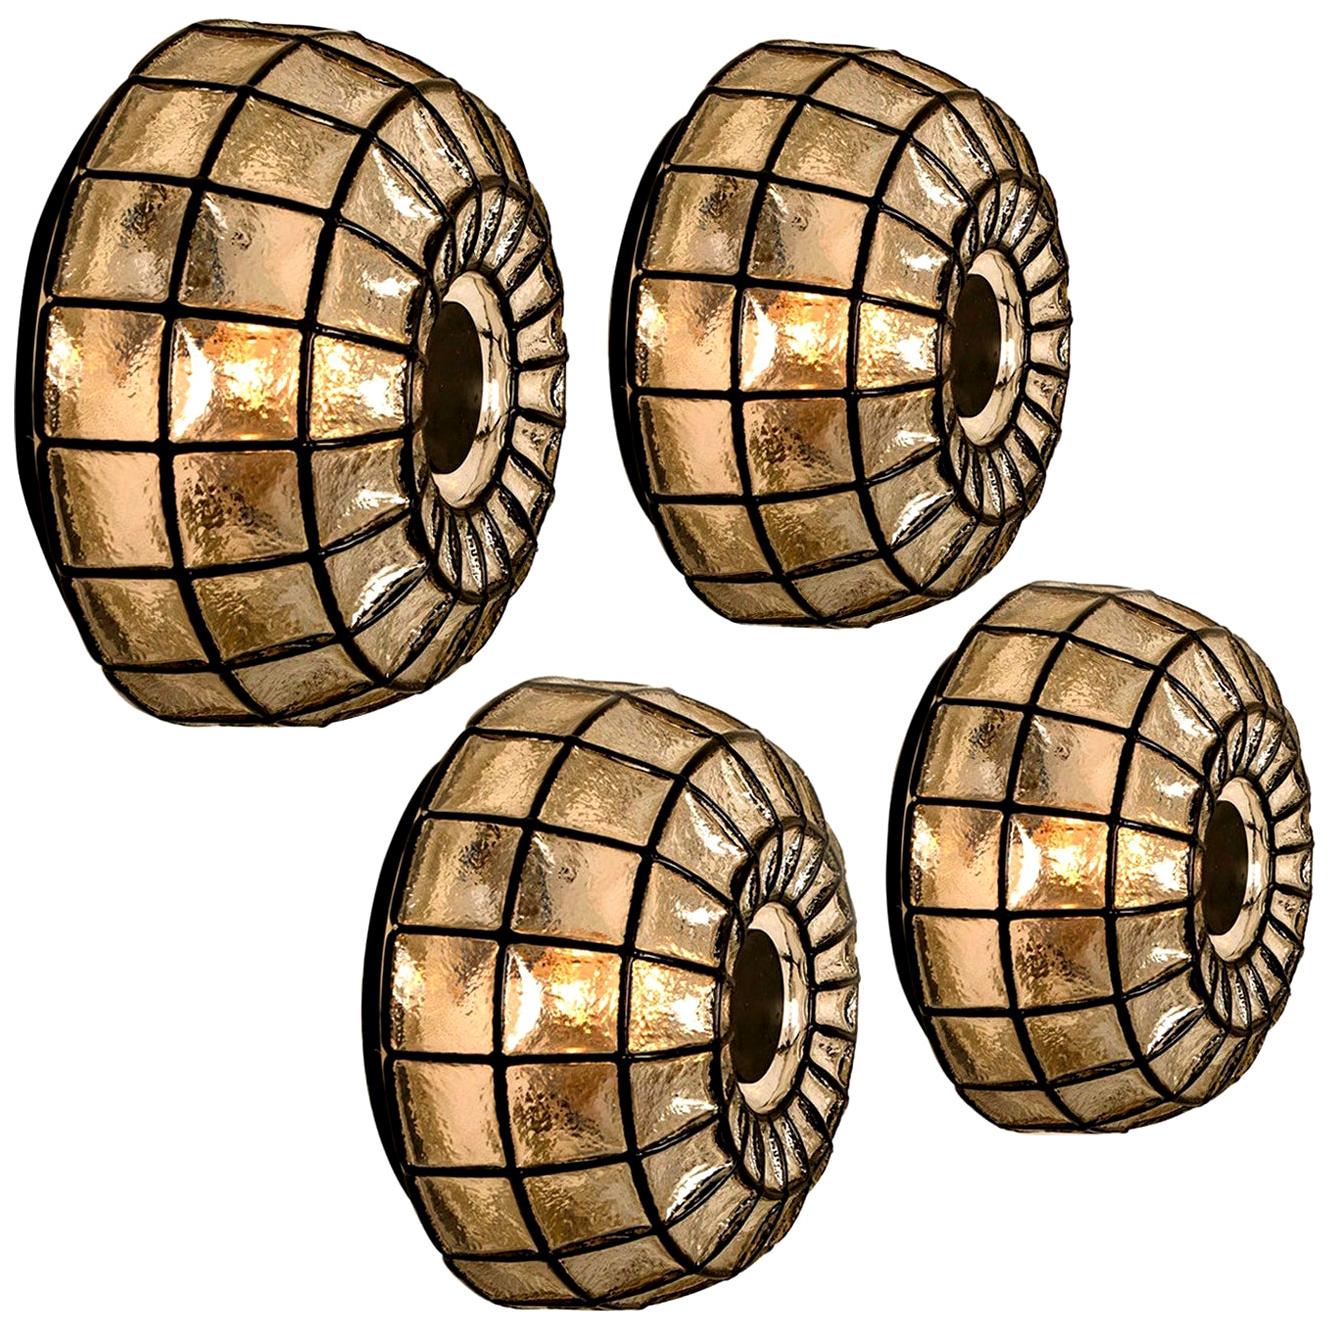 This beautiful and unique octagonal glass light flush mounts or wall lights or sconces were manufactured by Glashütte Limburg in Germany during the 1960s (late 1960s or early 1970s). Nice craftsmanship. This glass is blown and finished by hand. Each